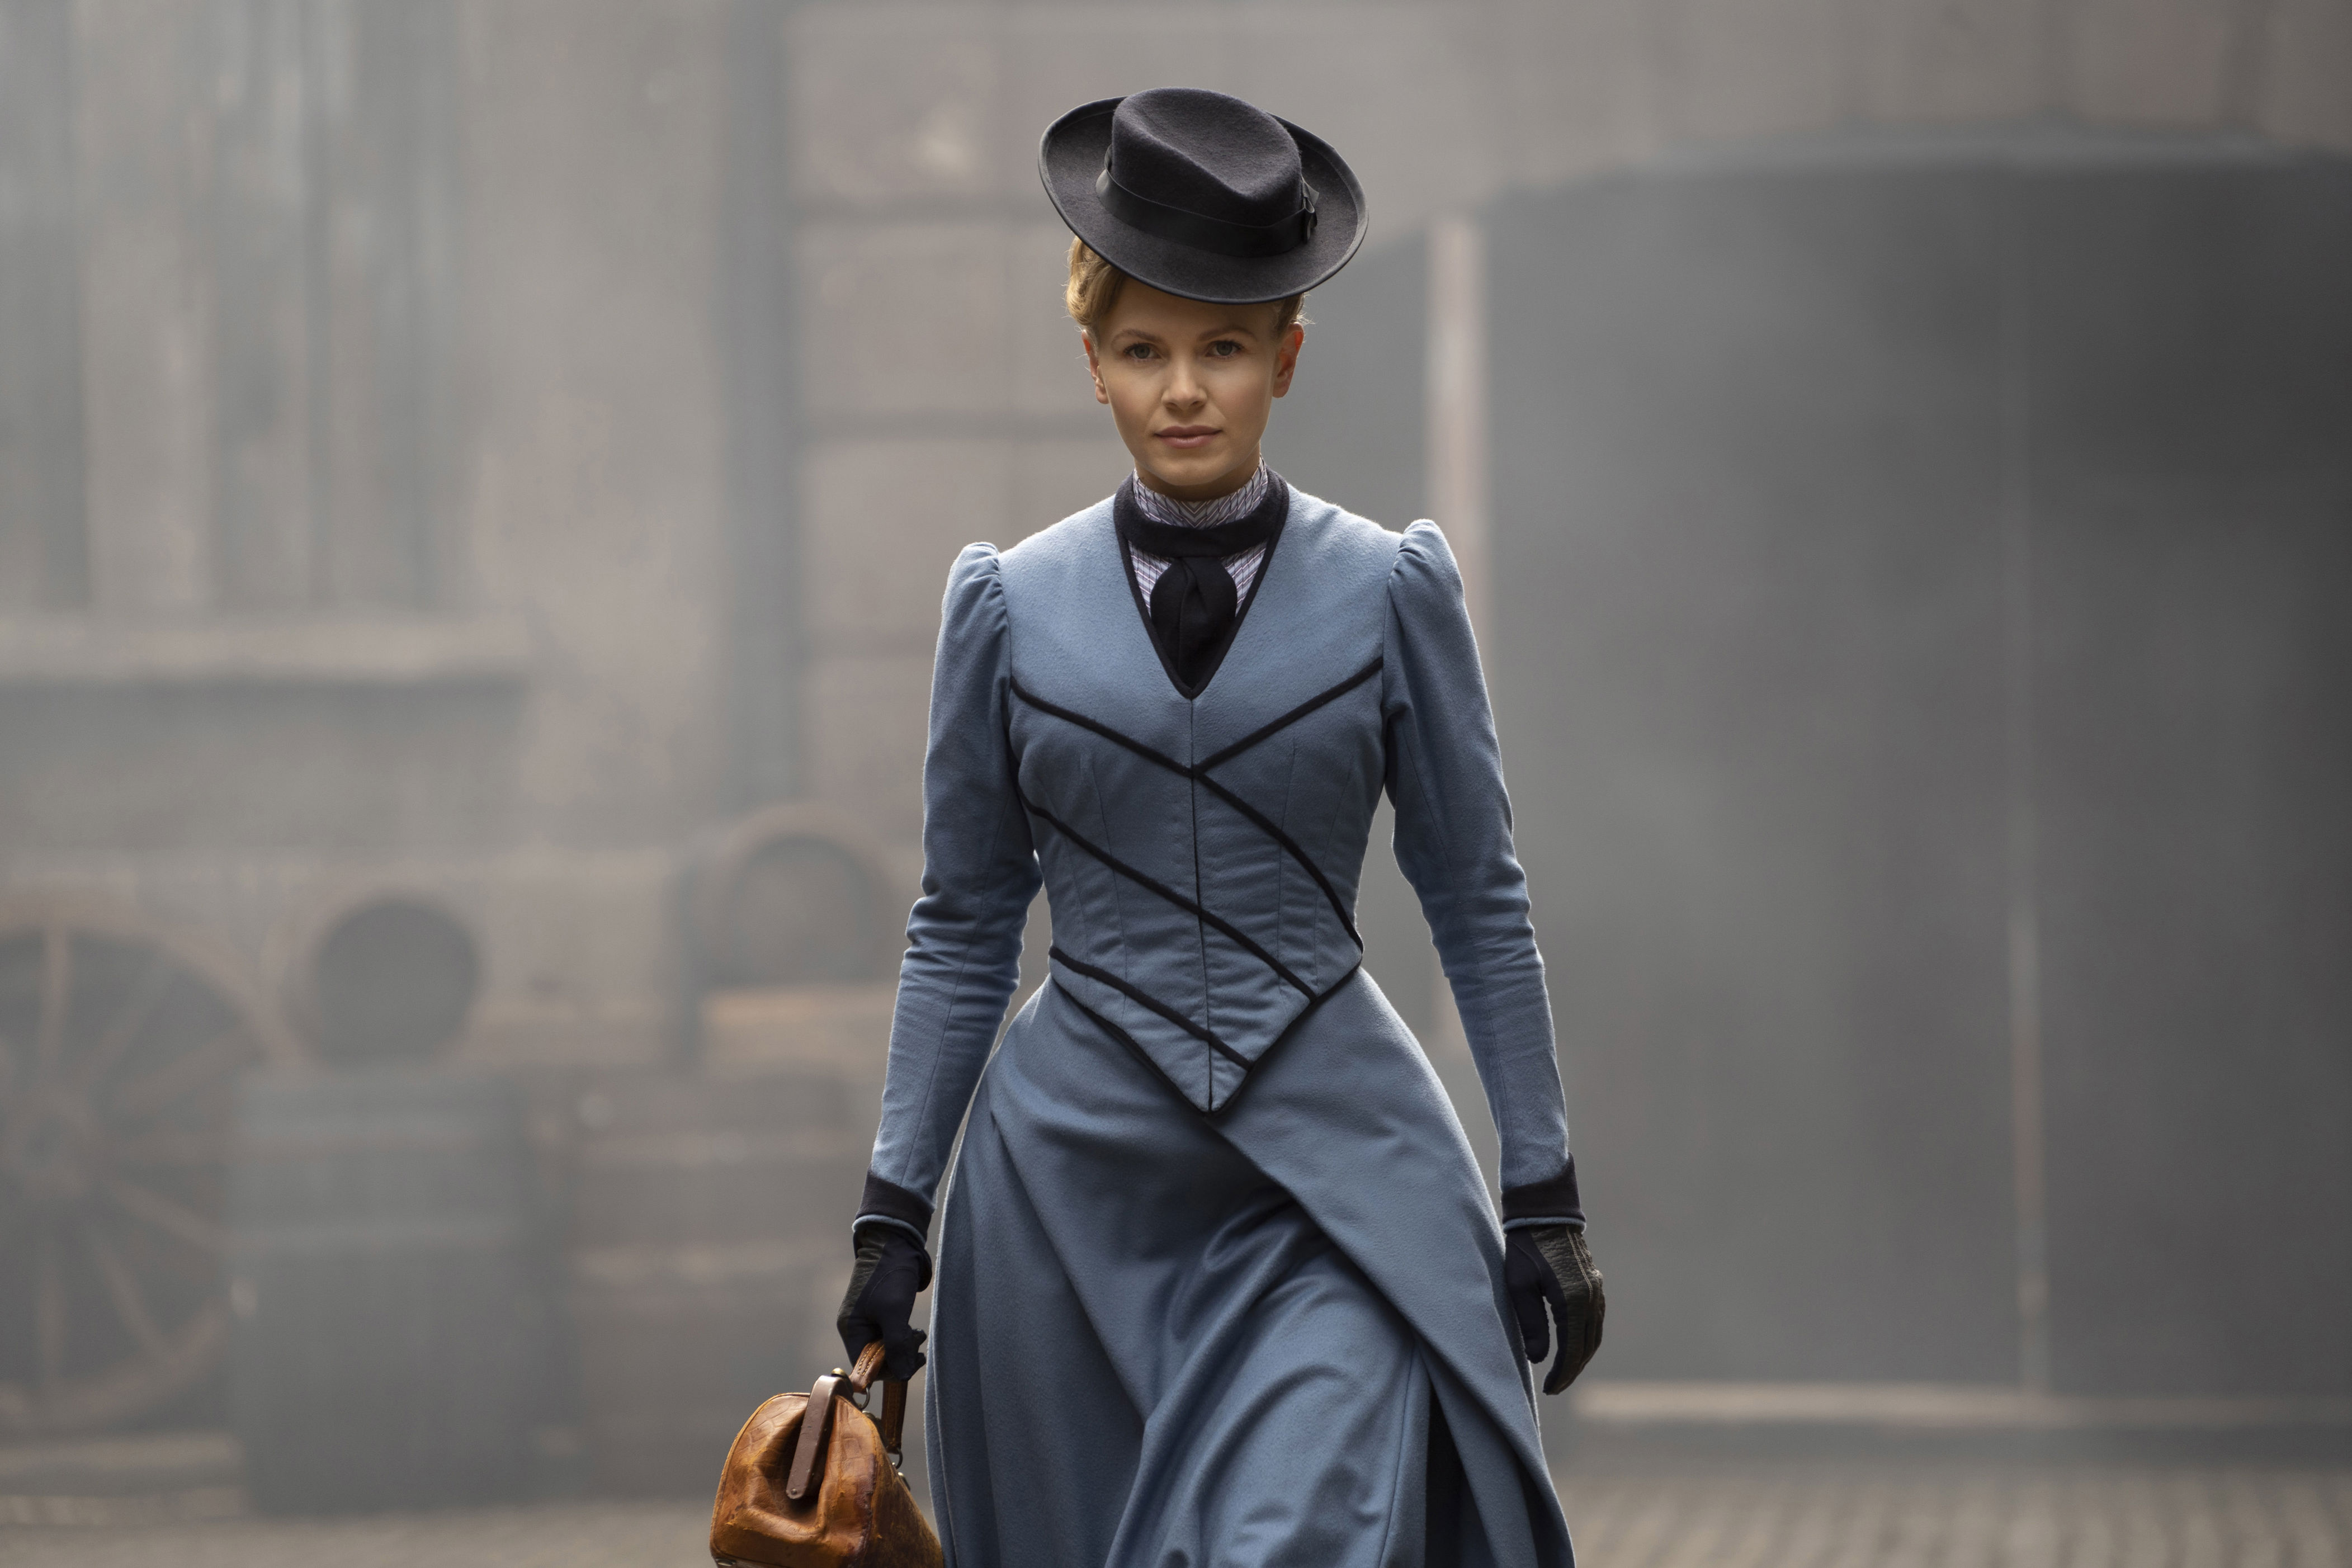 <p>The PBS Masterpiece series "Miss Scarlet & the Duke" debuted in 2021. Kate Phillips -- you know her from other killer period shows like "Peaky Blinders" and "The Crown" -- stars as <span>Eliza Scarlet, the brilliant, plucky</span> <span>daughter of a renowned London private detective</span> who turns up dead. With the reluctant and occasional help of family friend and Scotland Yard detective William Wellington (aka the Duke, played by Stuart Martin), with whom she shares a crackling romantic chemistry -- Eliza takes over the family sleuthing business and takes on the challenges of being the only female investigator in Victorian London.</p><p>After season 4 aired in the States in 2024, PBS announced that the series had been picked up for a fifth season -- but that the Duke won't be returning. The series is also being renamed "Miss Scarlet."</p>